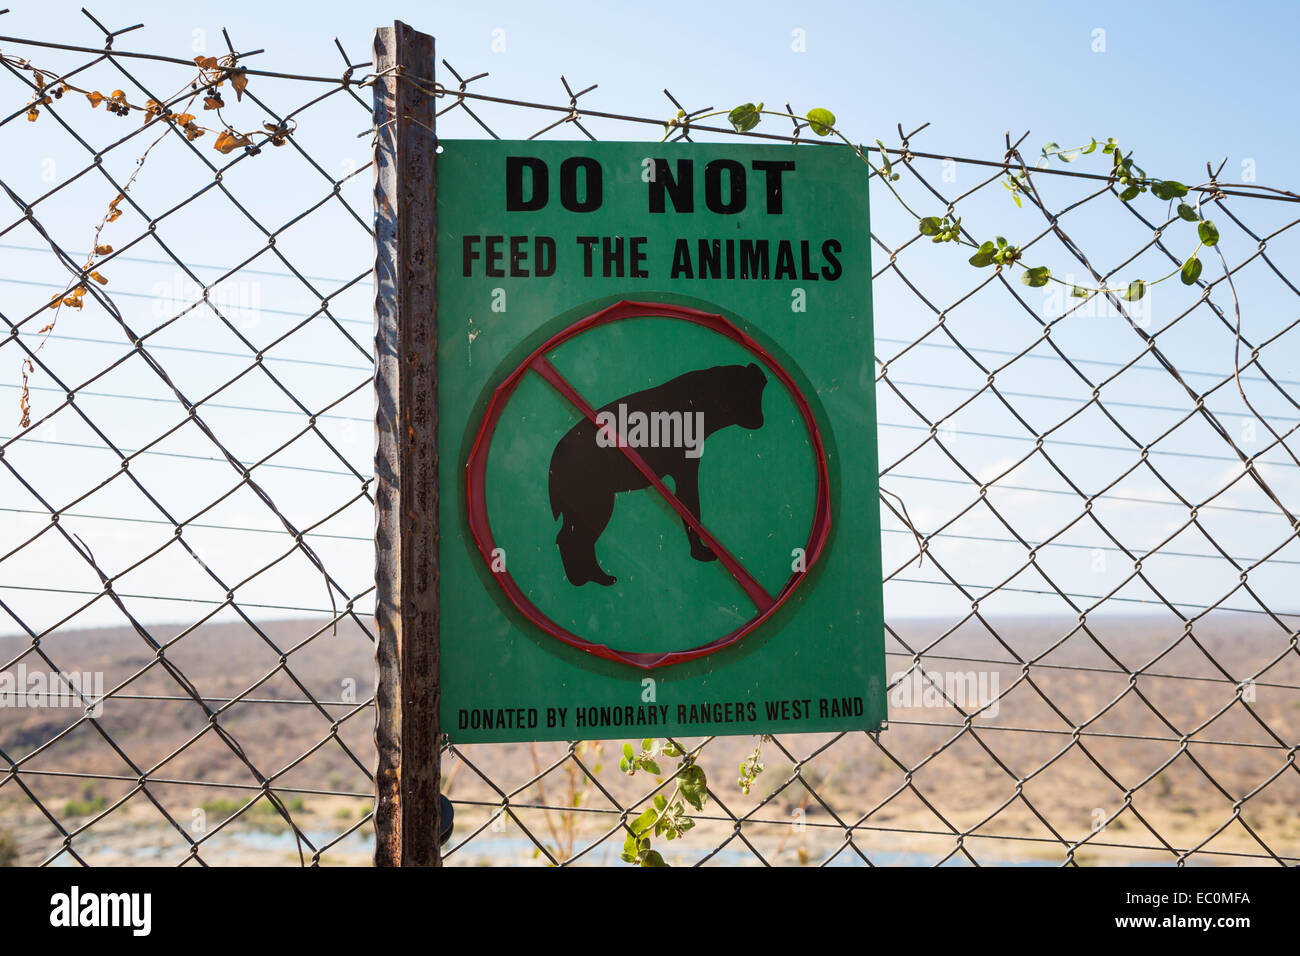 'Do not feed the animals' sign, Kruger national park, South Africa Stock Photo